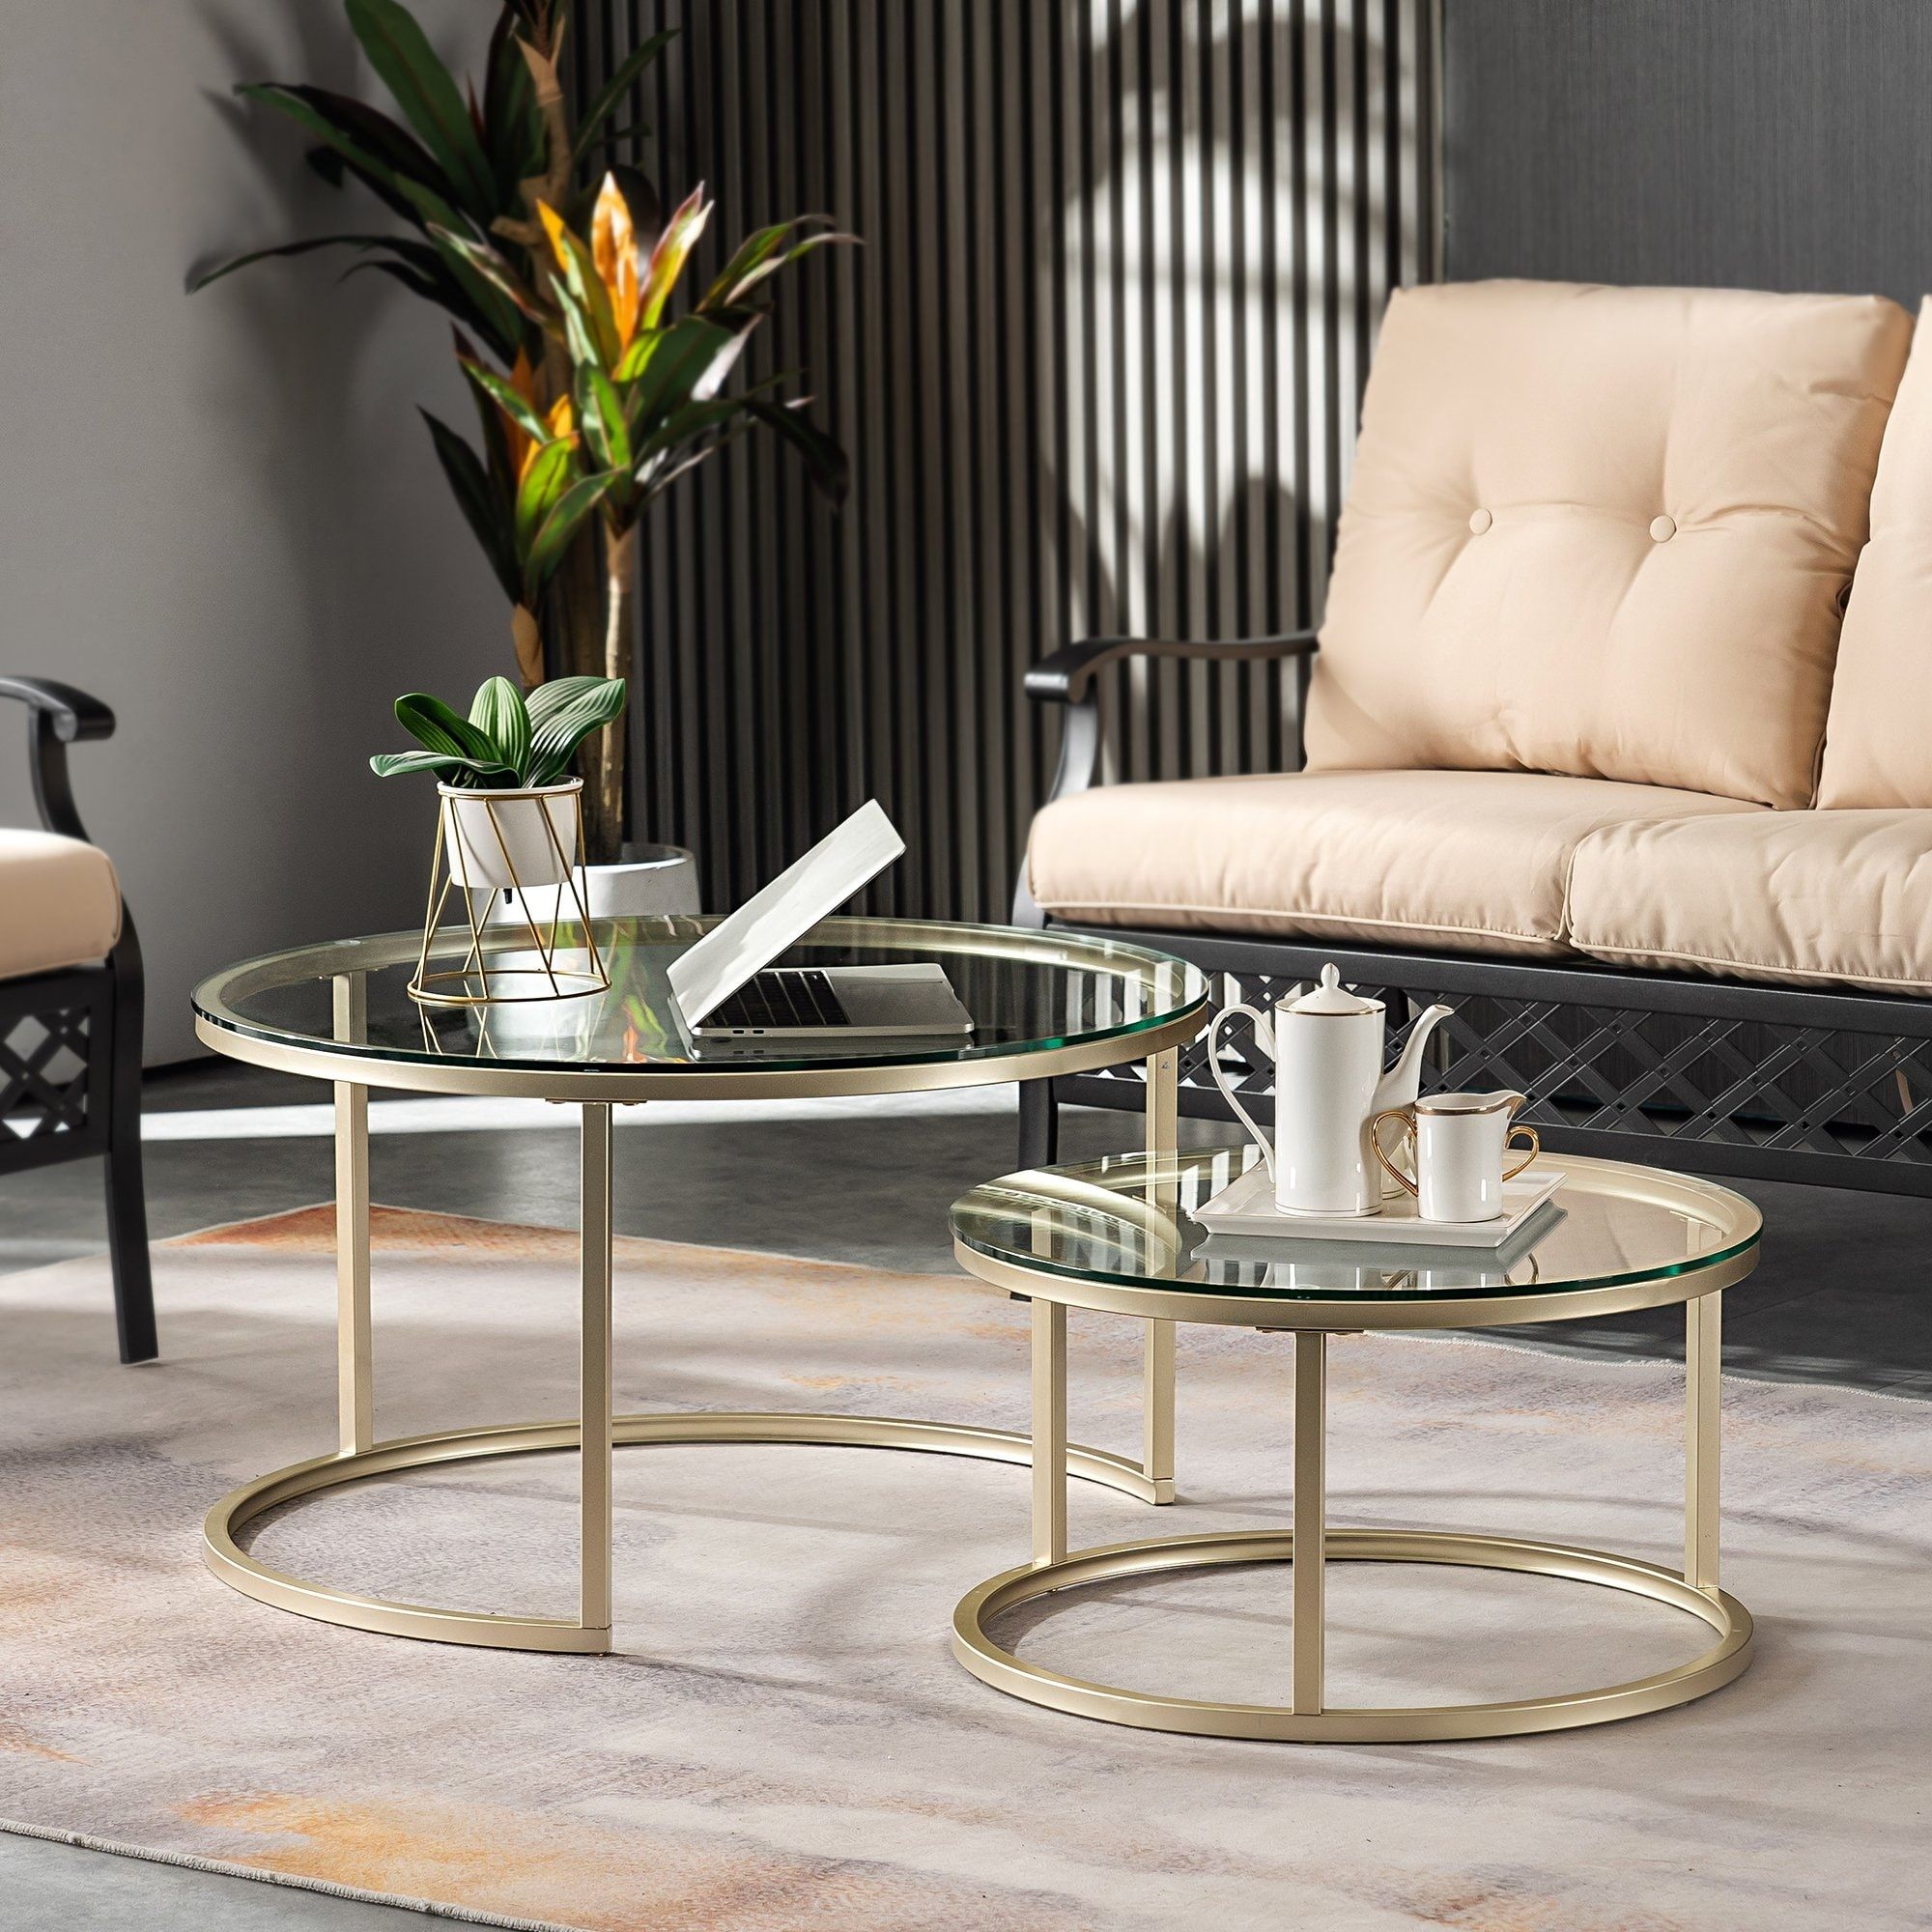 Ivinta Round Nesting Coffee Table Set Of 2, Modern Glass Coffee Tables For  Living Room, Accent Clear Gold Side Tables Set – On Sale – Bed Bath &  Beyond – 33878289 In Nesting Coffee Tables (View 11 of 15)